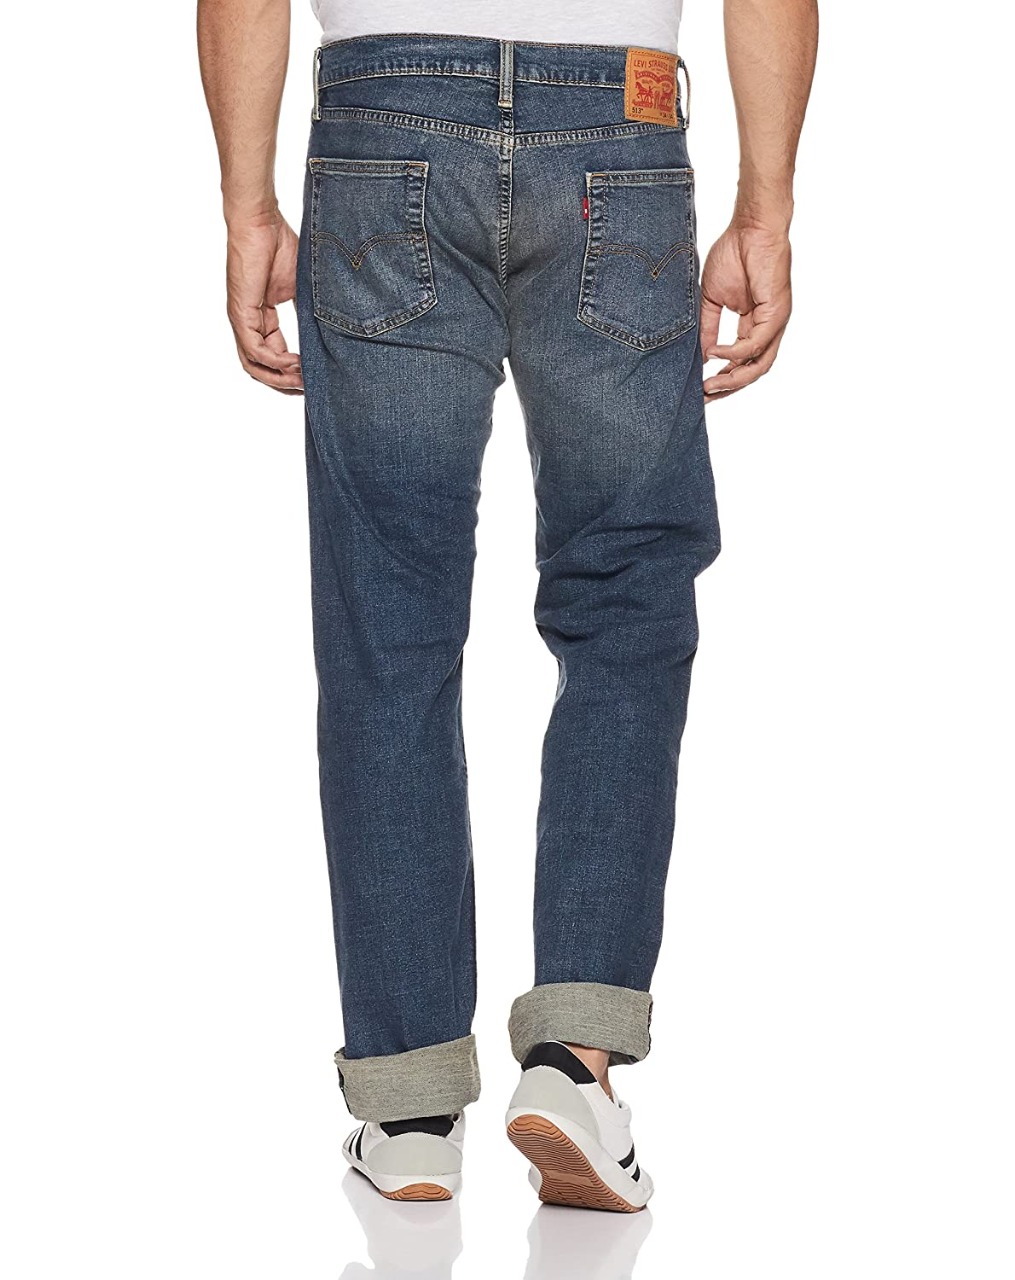 My Future Life Pvt Limited | Levi's Men's (513) Slim Straight Fit Jeans